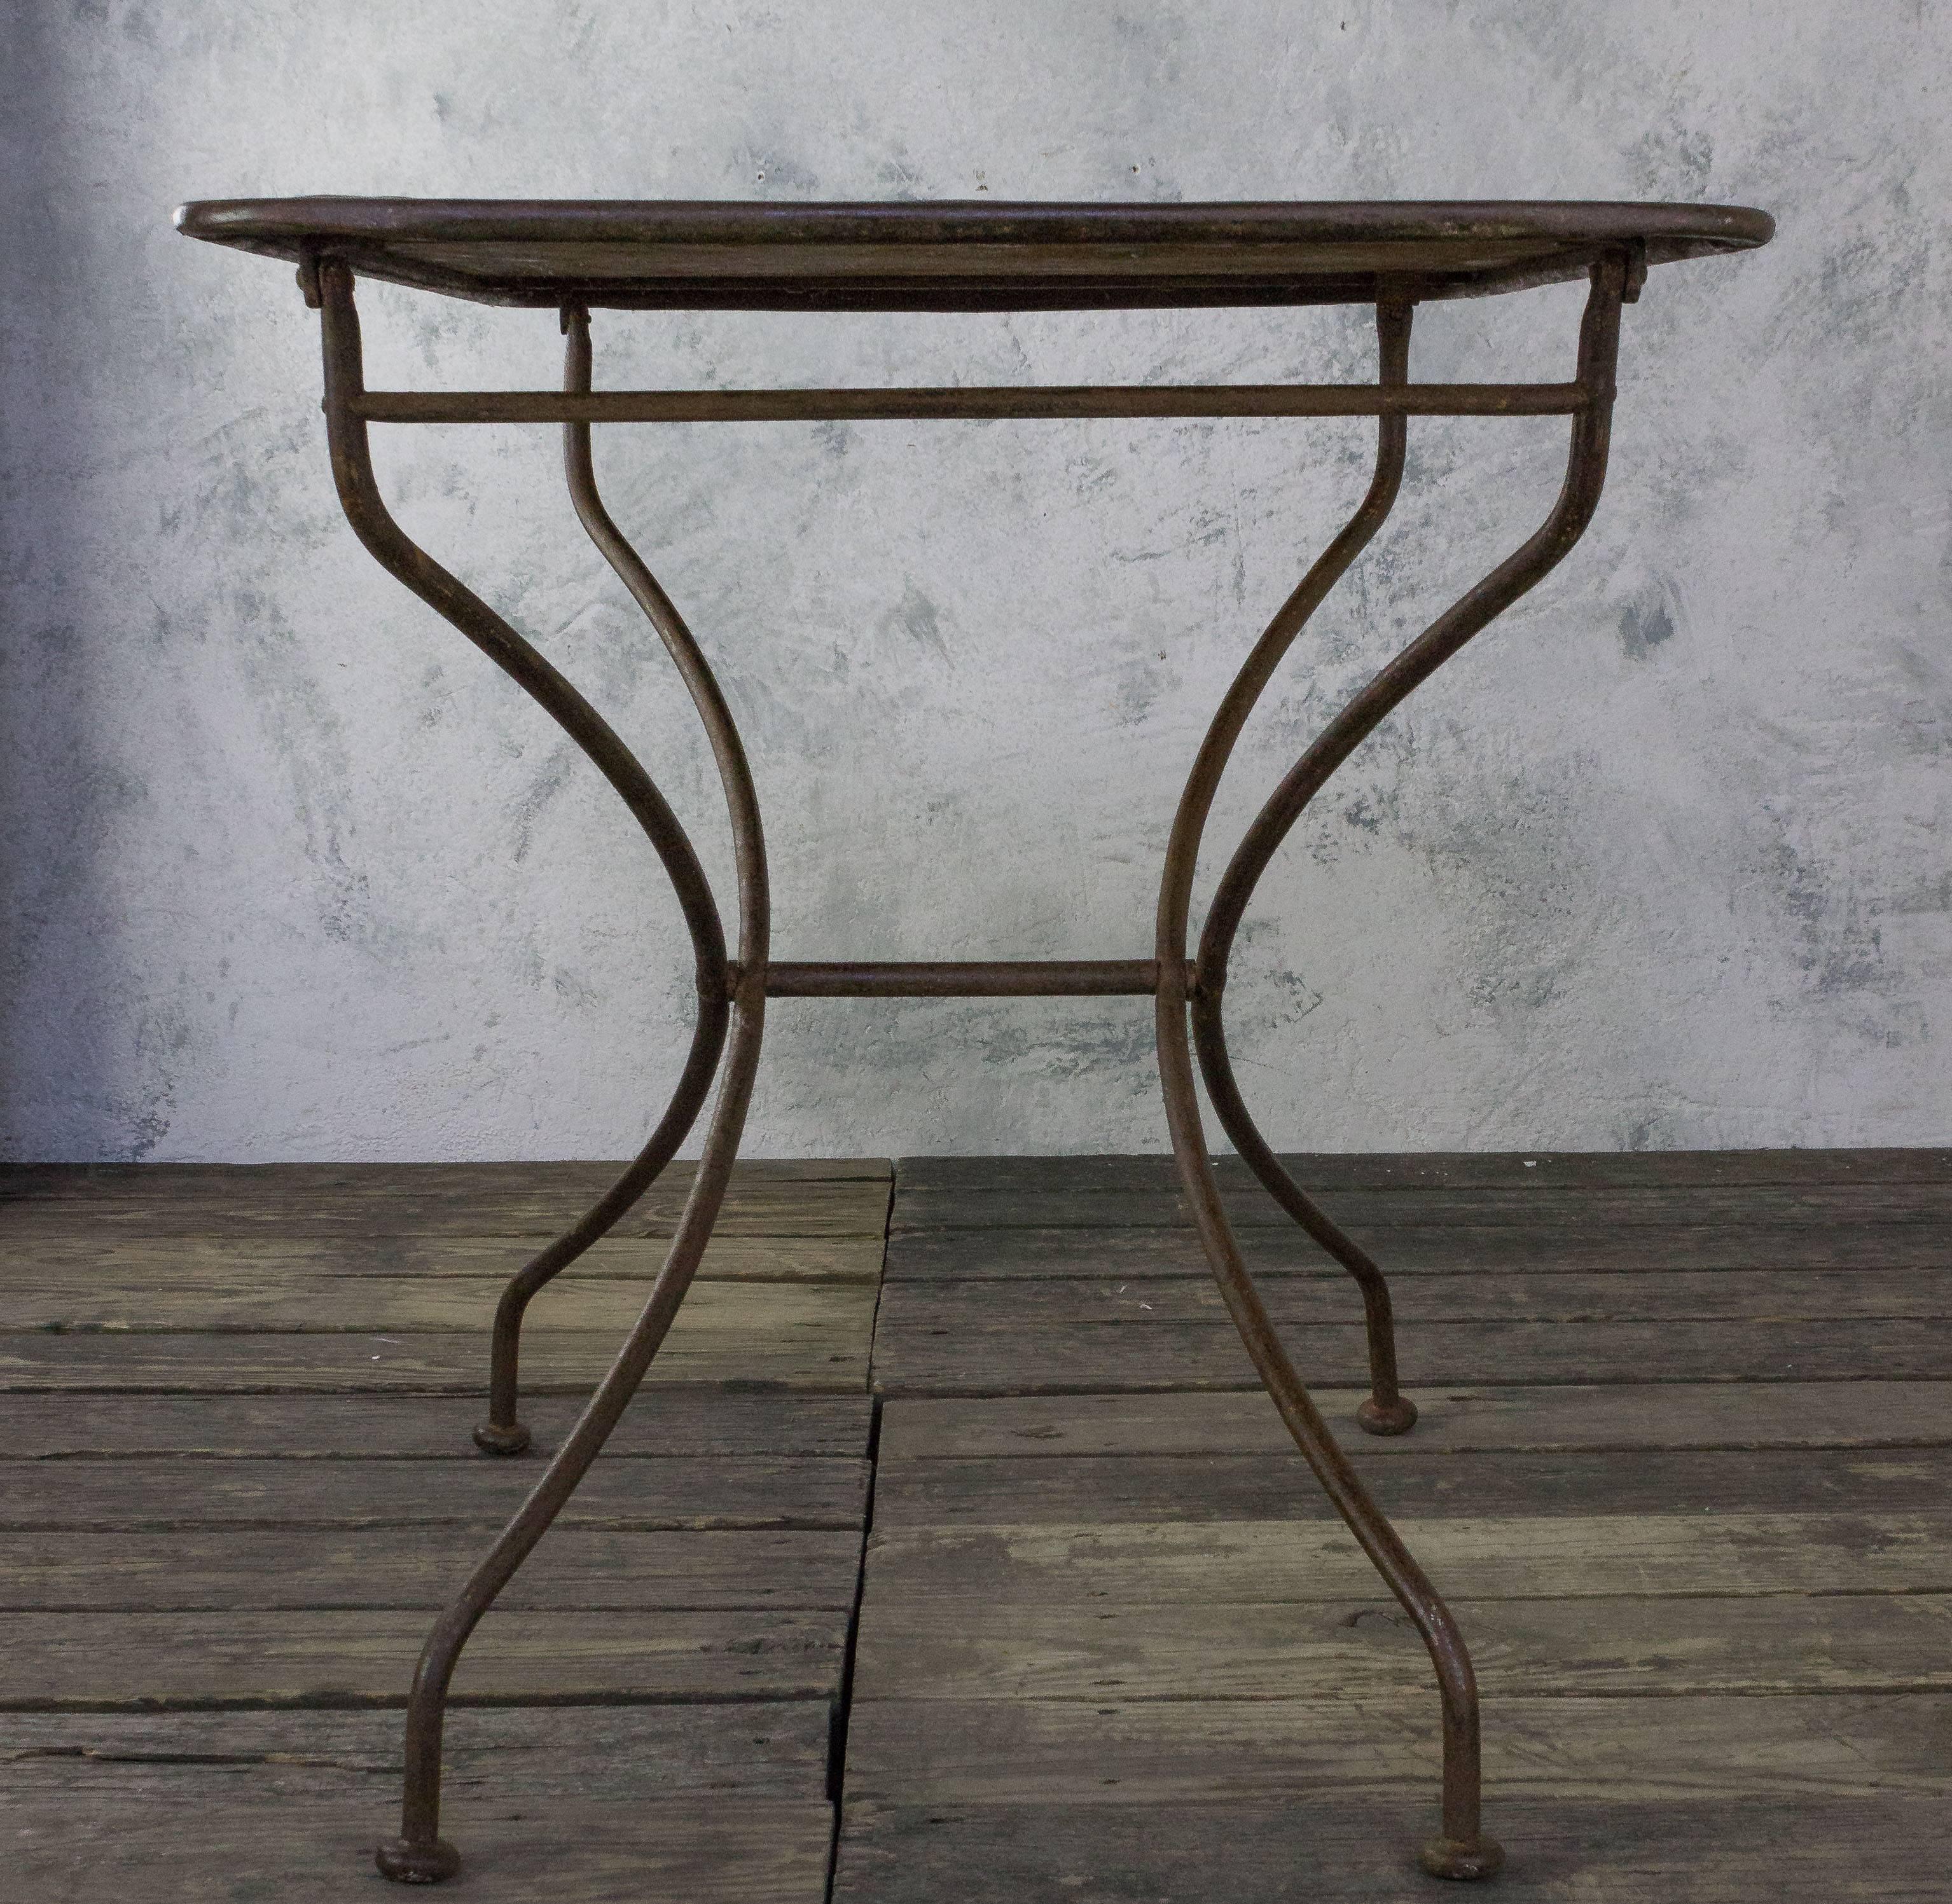 20th Century Early 20th French Folding Garden Table with Patina